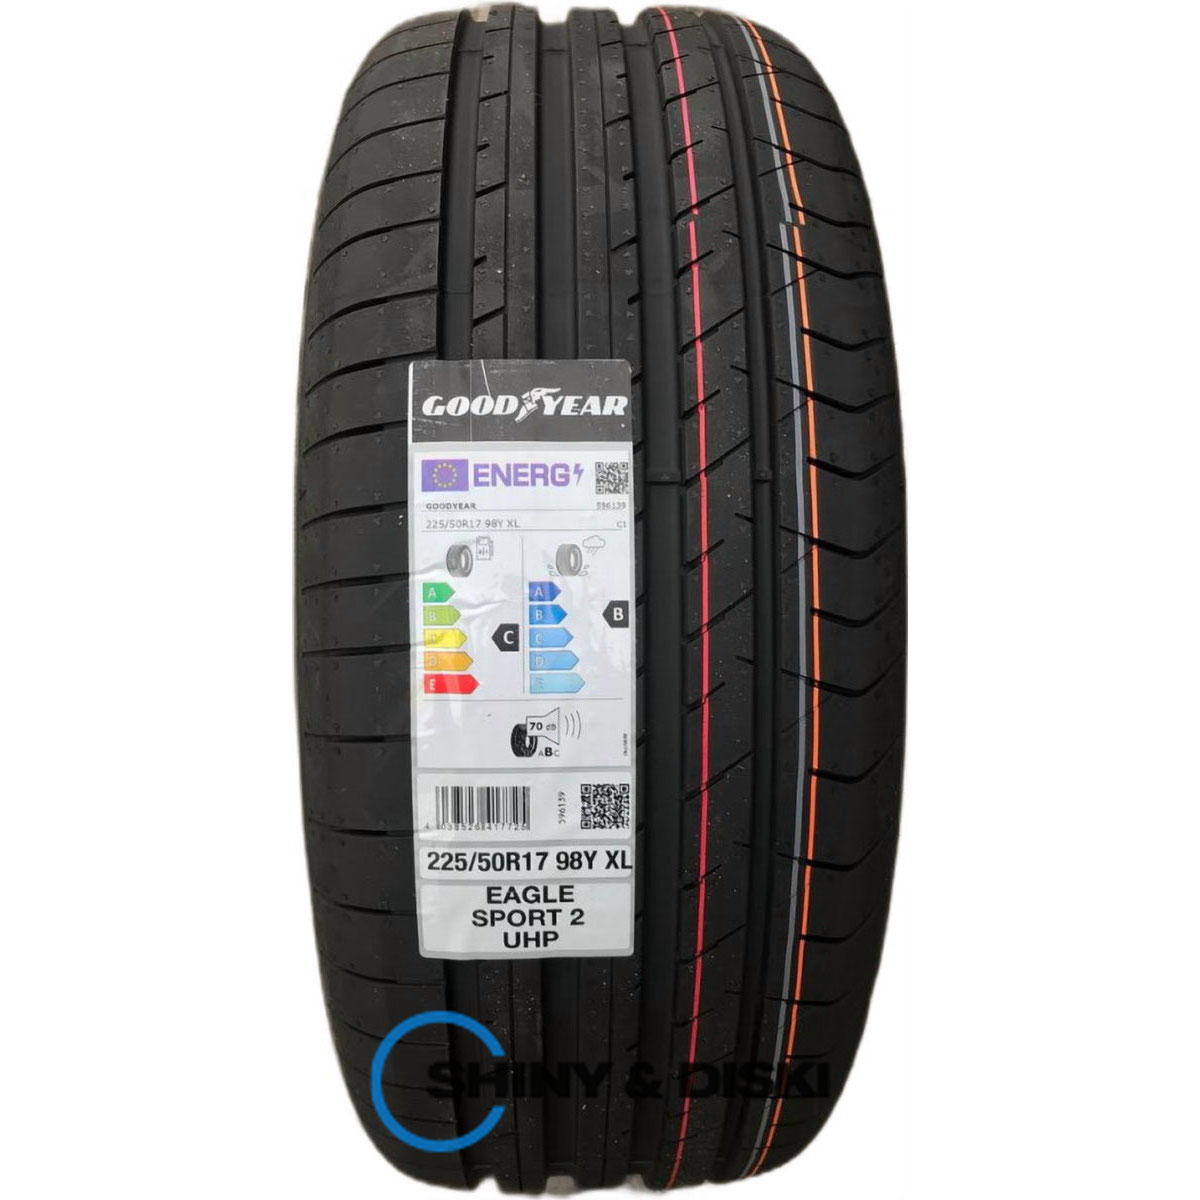 покришки goodyear eagle sport 2 uhp 235/40 r19 96y xl fp